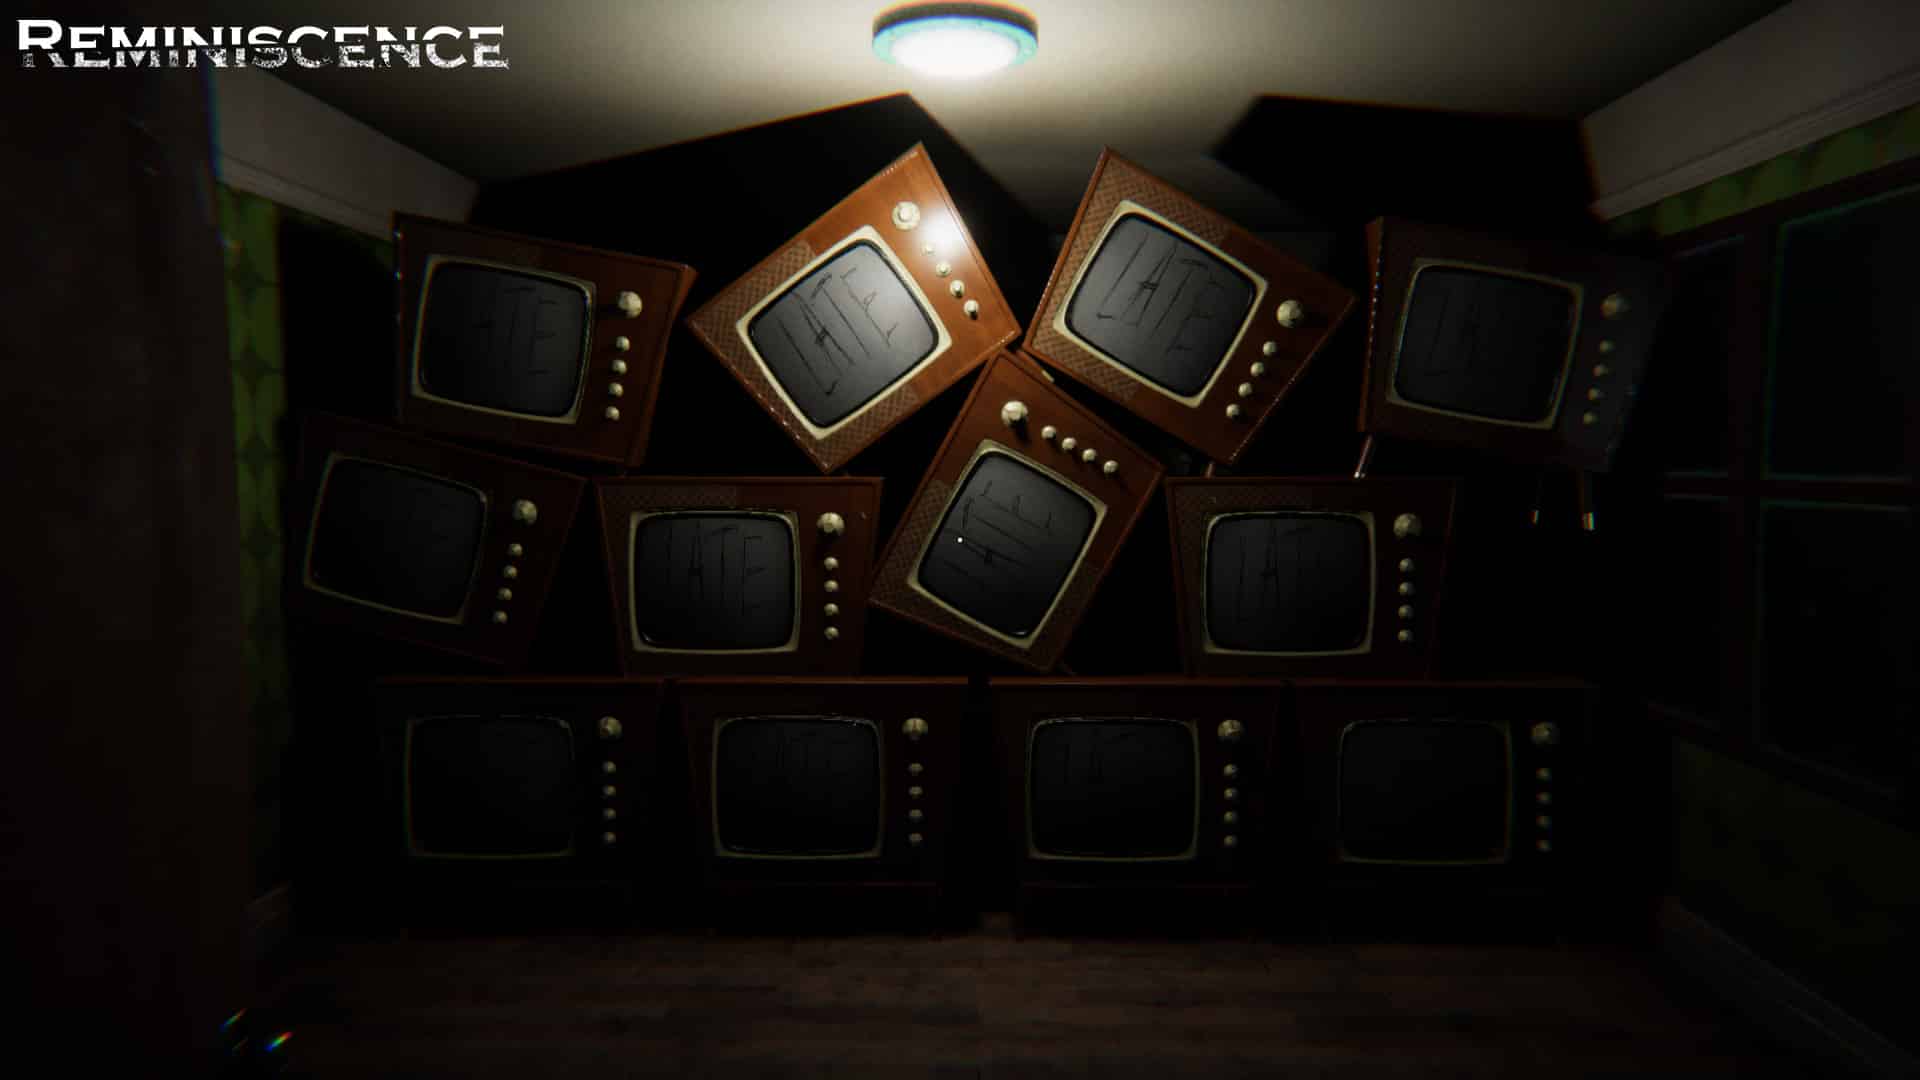 stack of scary looking TVs in a screenshot of the game Reminiscence